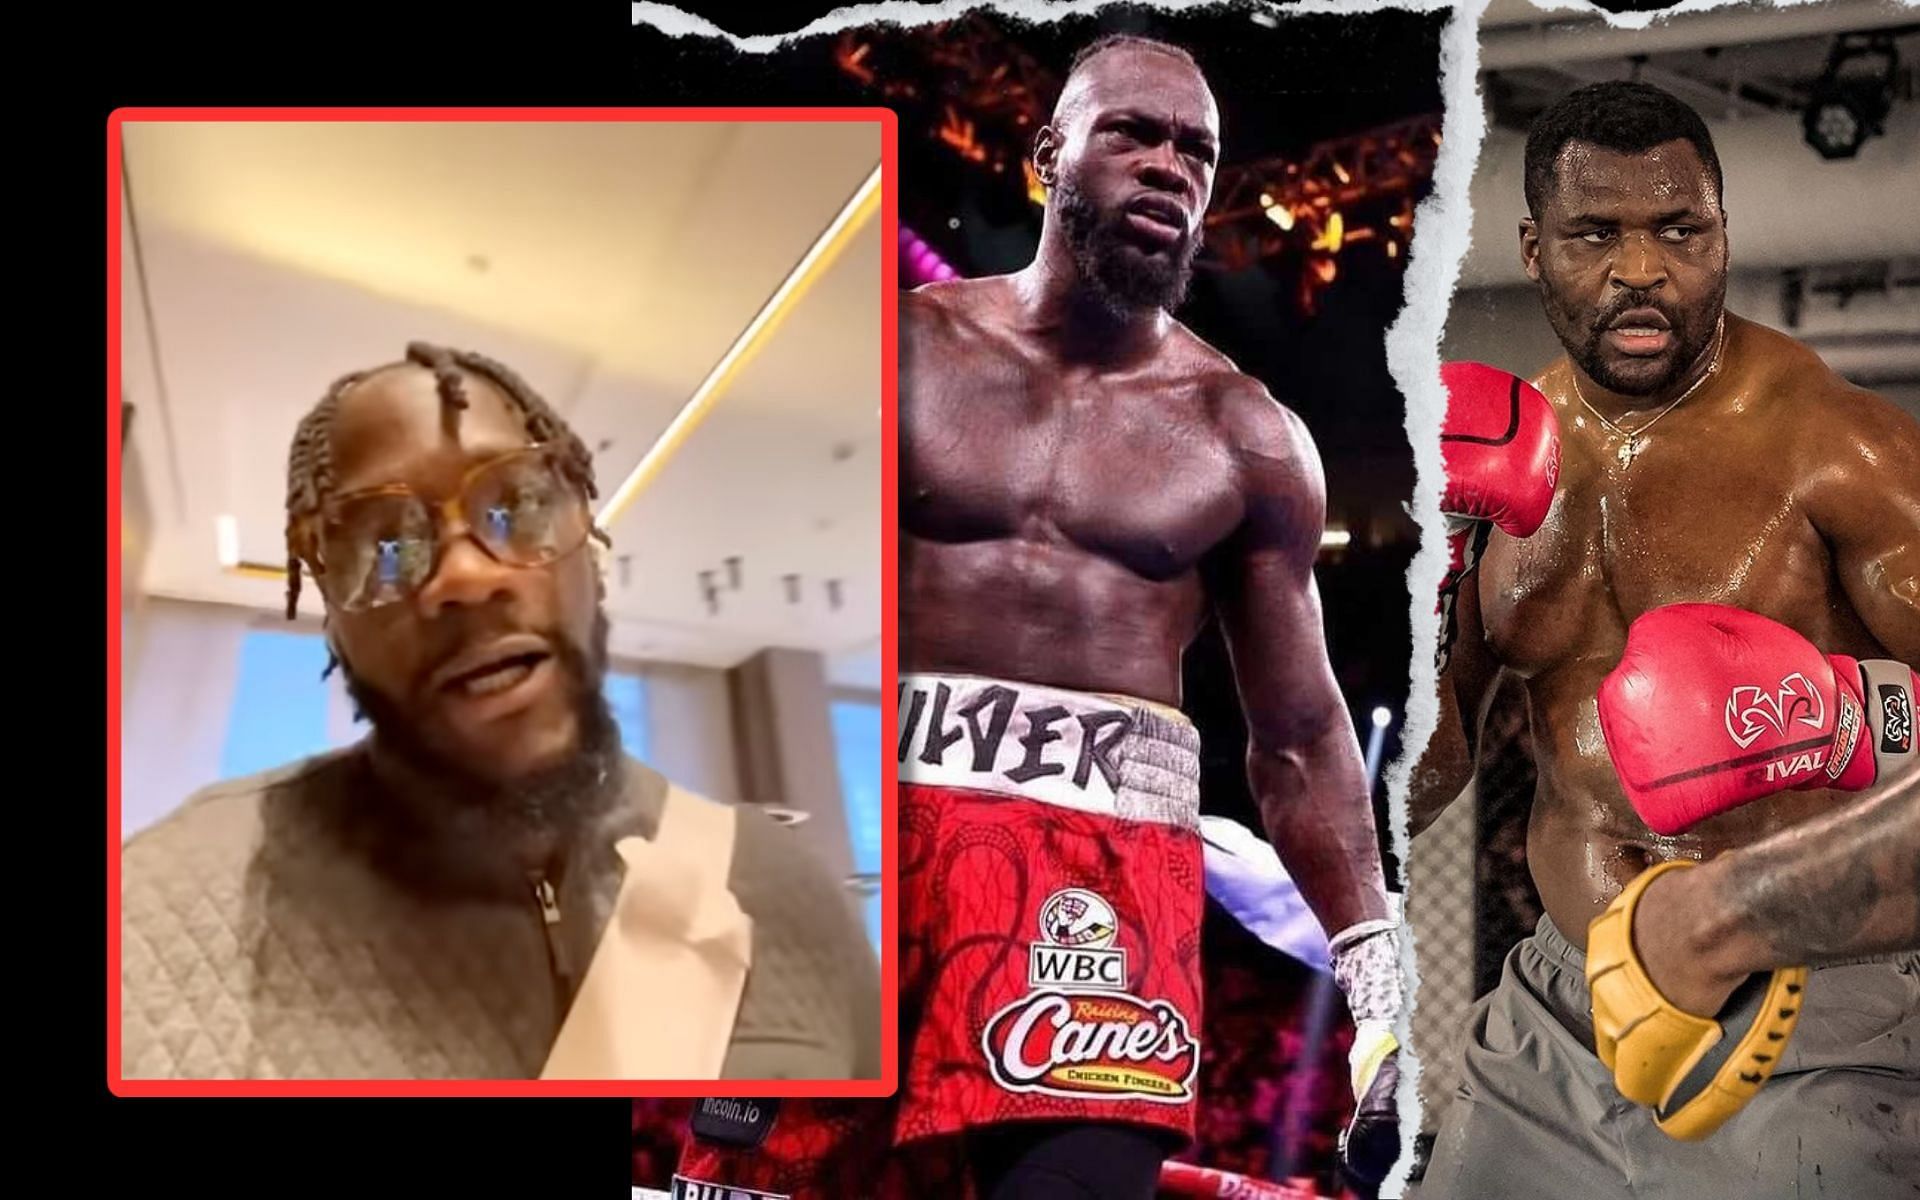 Deontay Wilder optimistic about Francis Ngannou fight, provides latest updates on talks. [Image credits: @78SPORTSTV on YouTube; @bronzebomber and @francisngannou on Instagram]